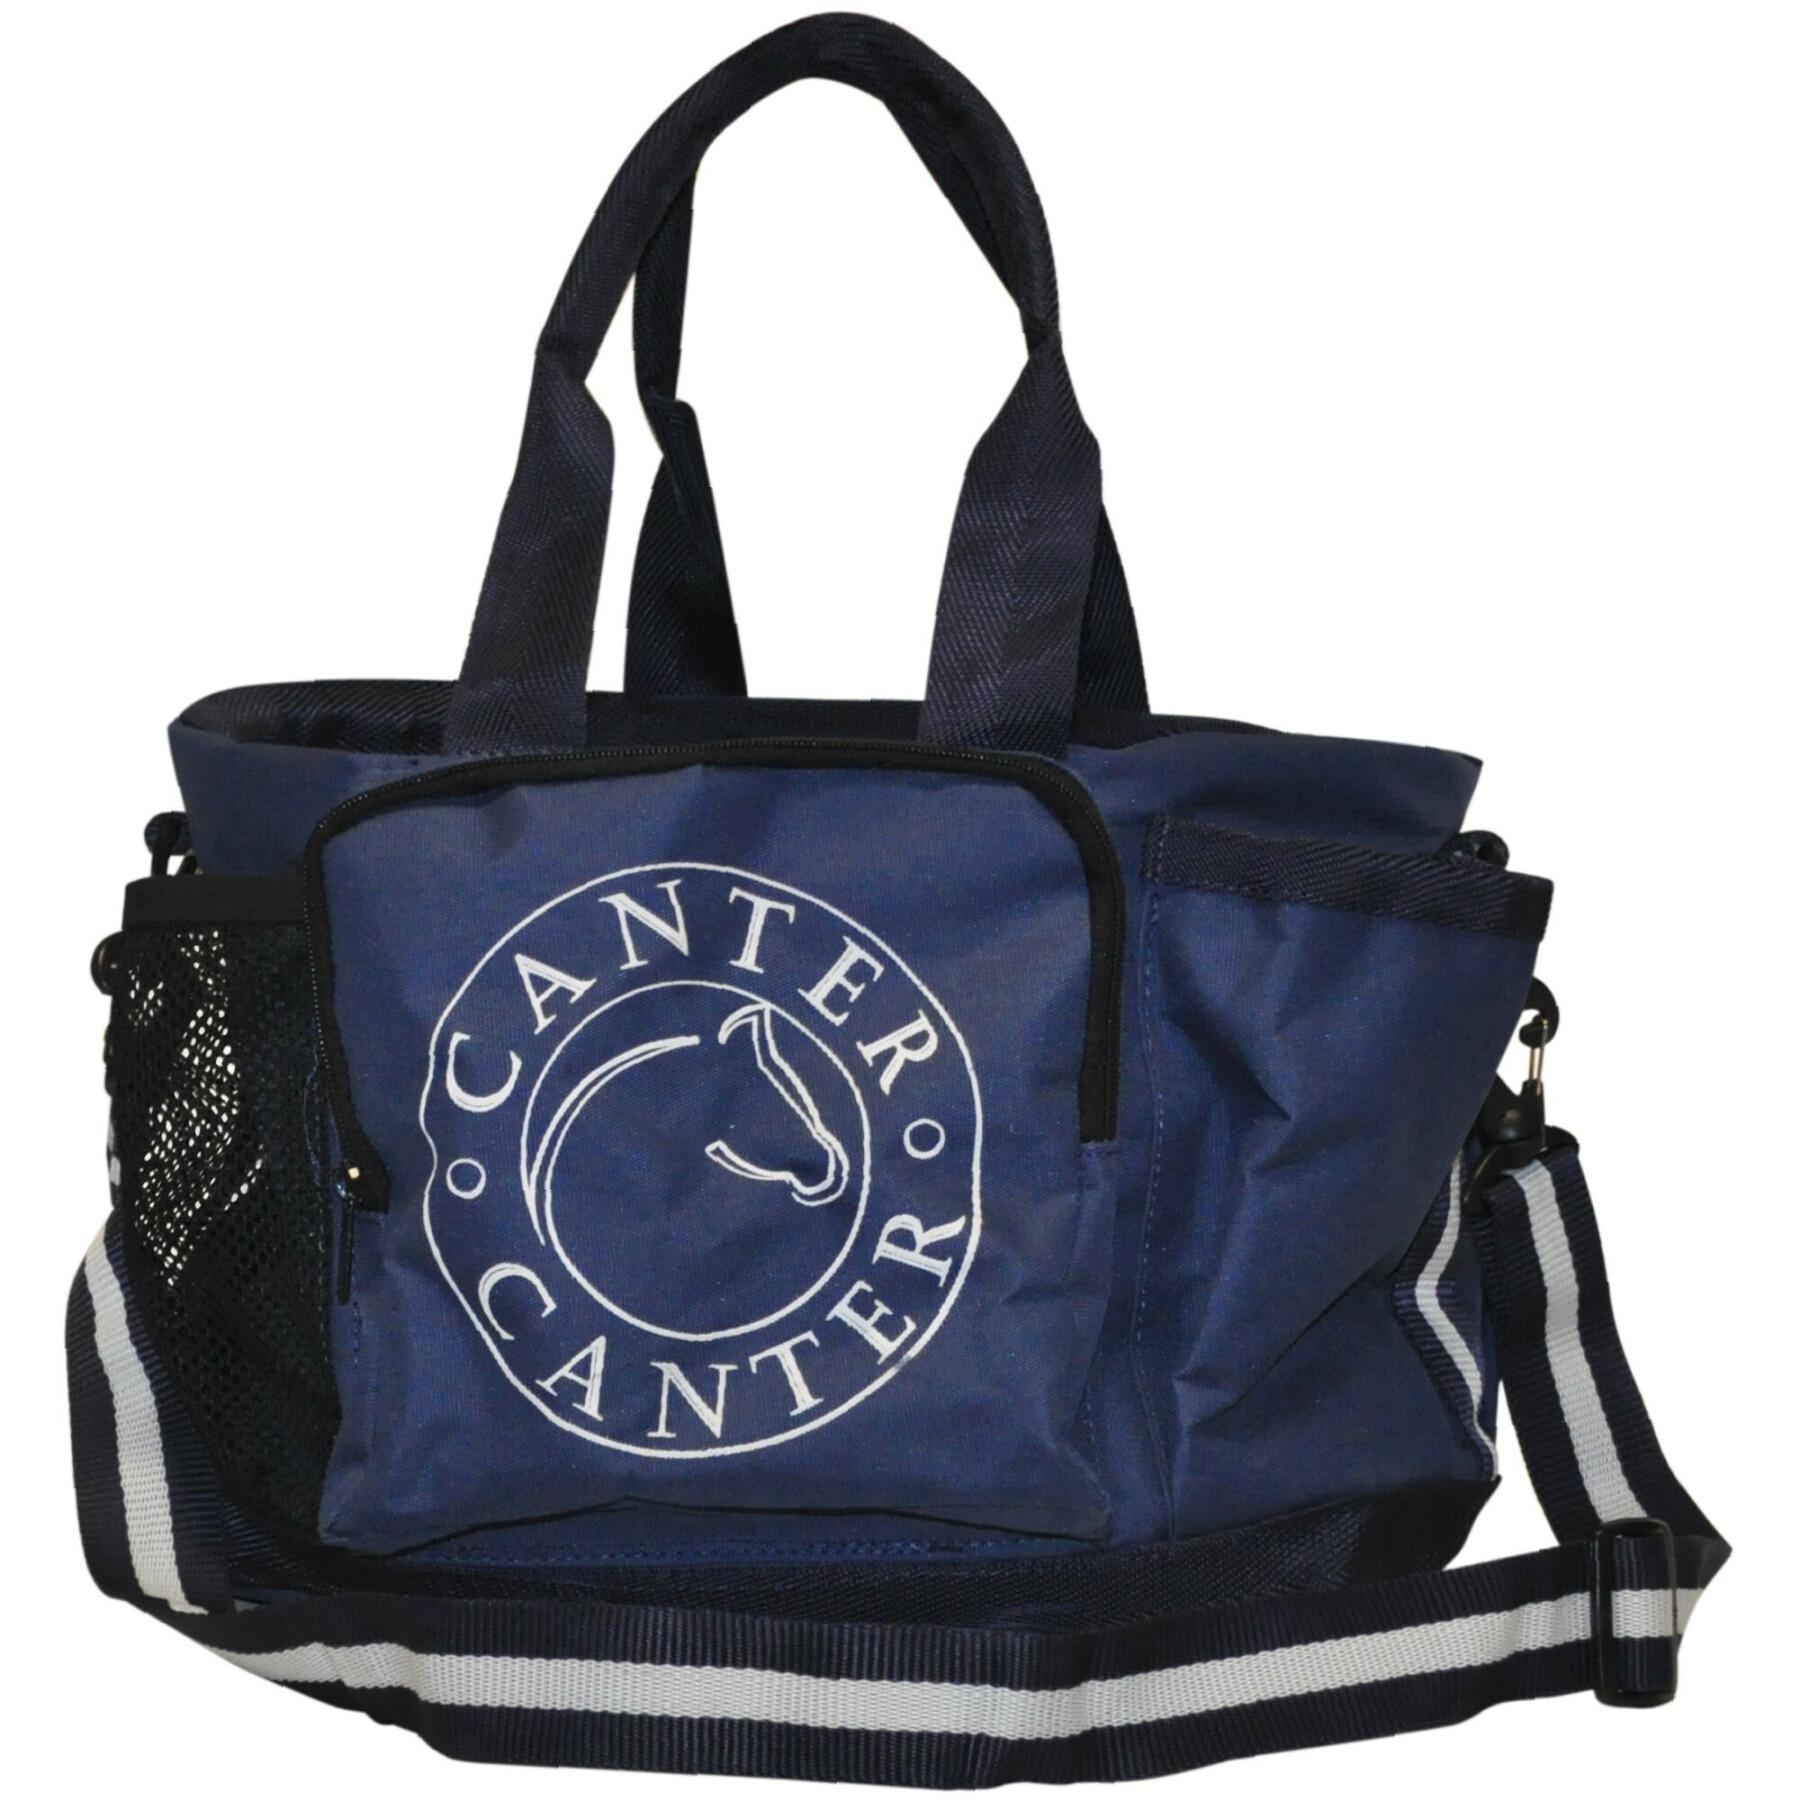 Grooming bag Canter